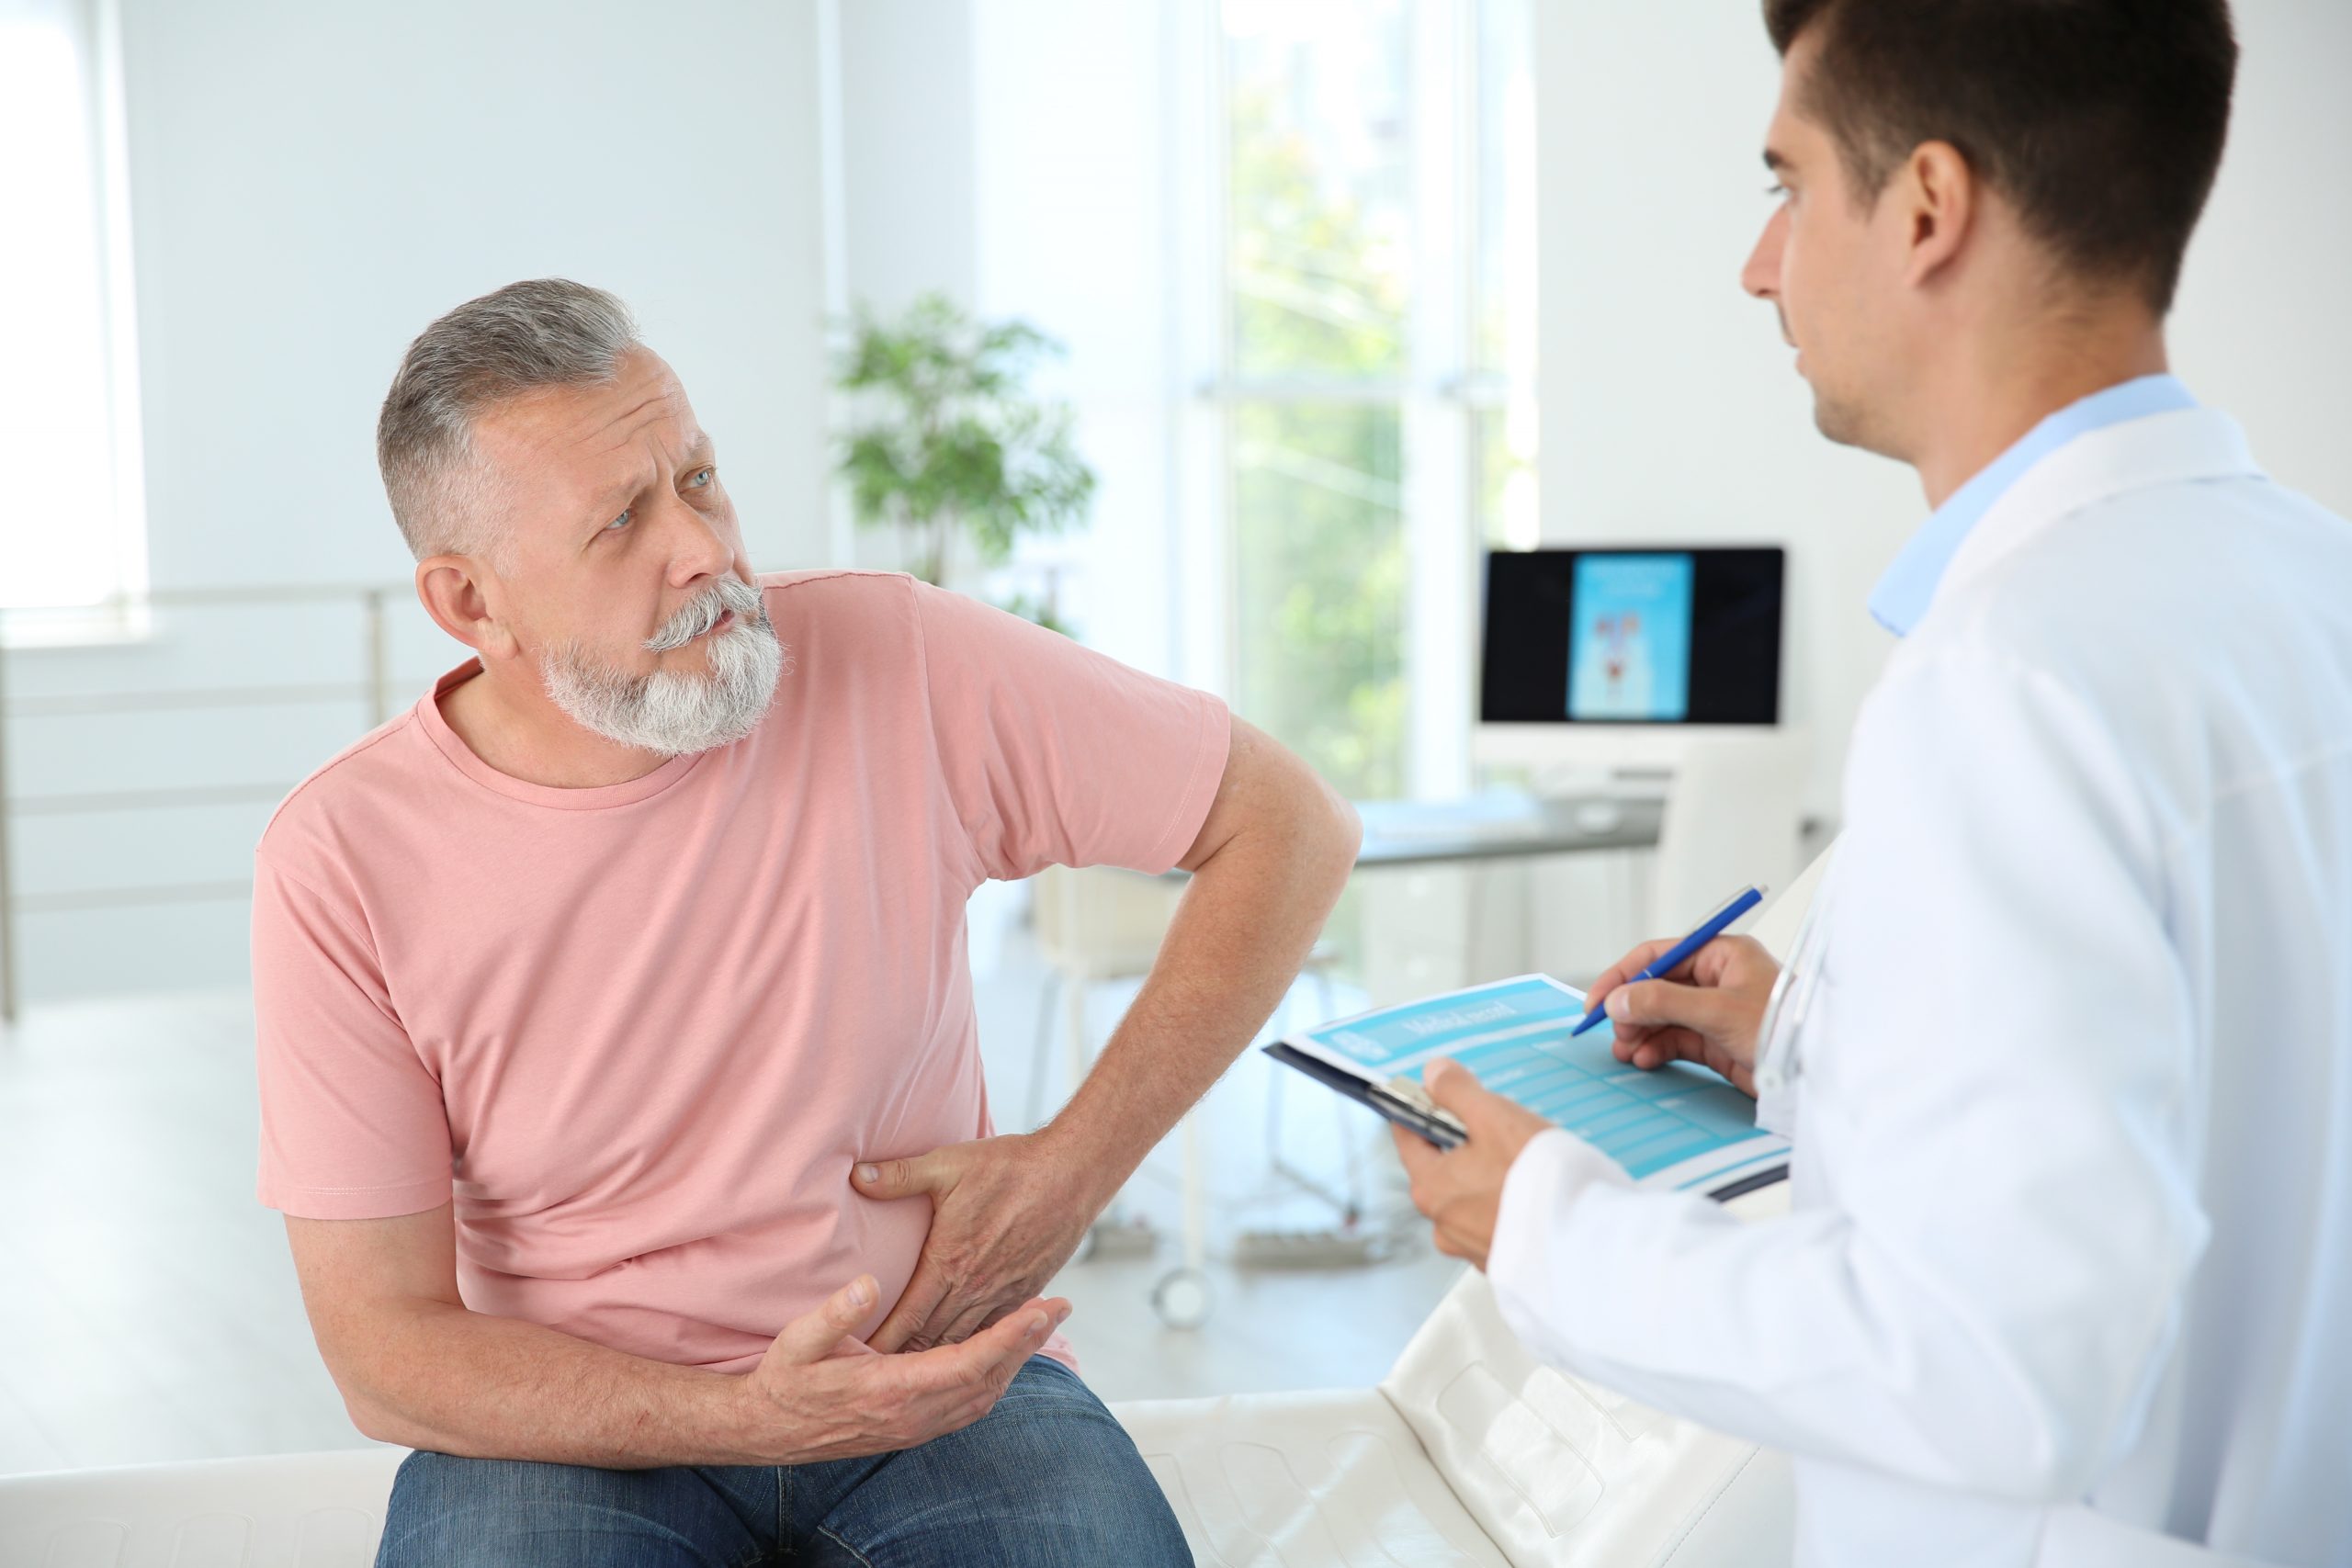 Common prostate problems and their symptoms